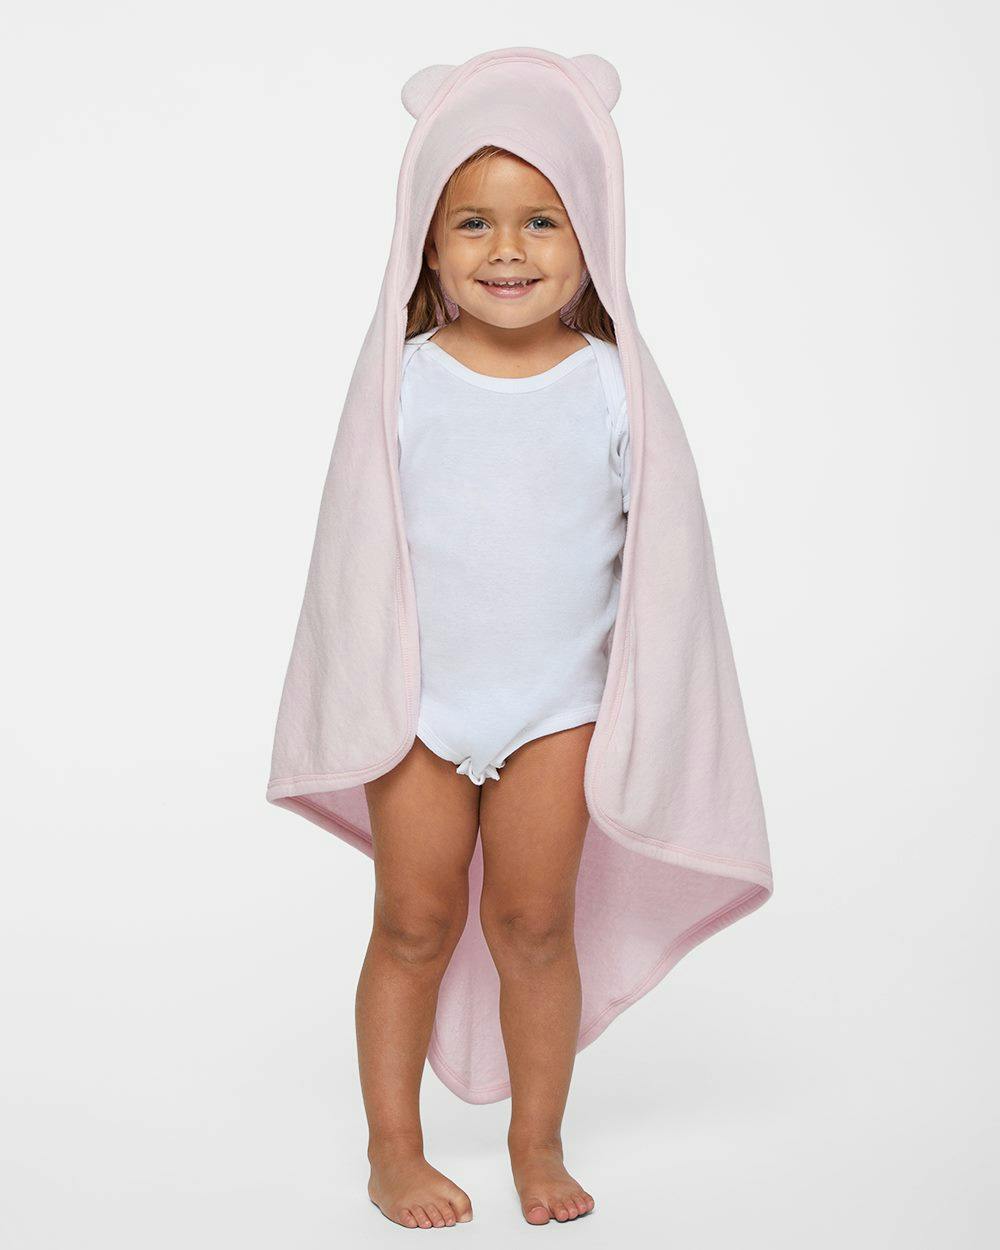 Image for Terry Cloth Hooded Towel with Ears - 1013